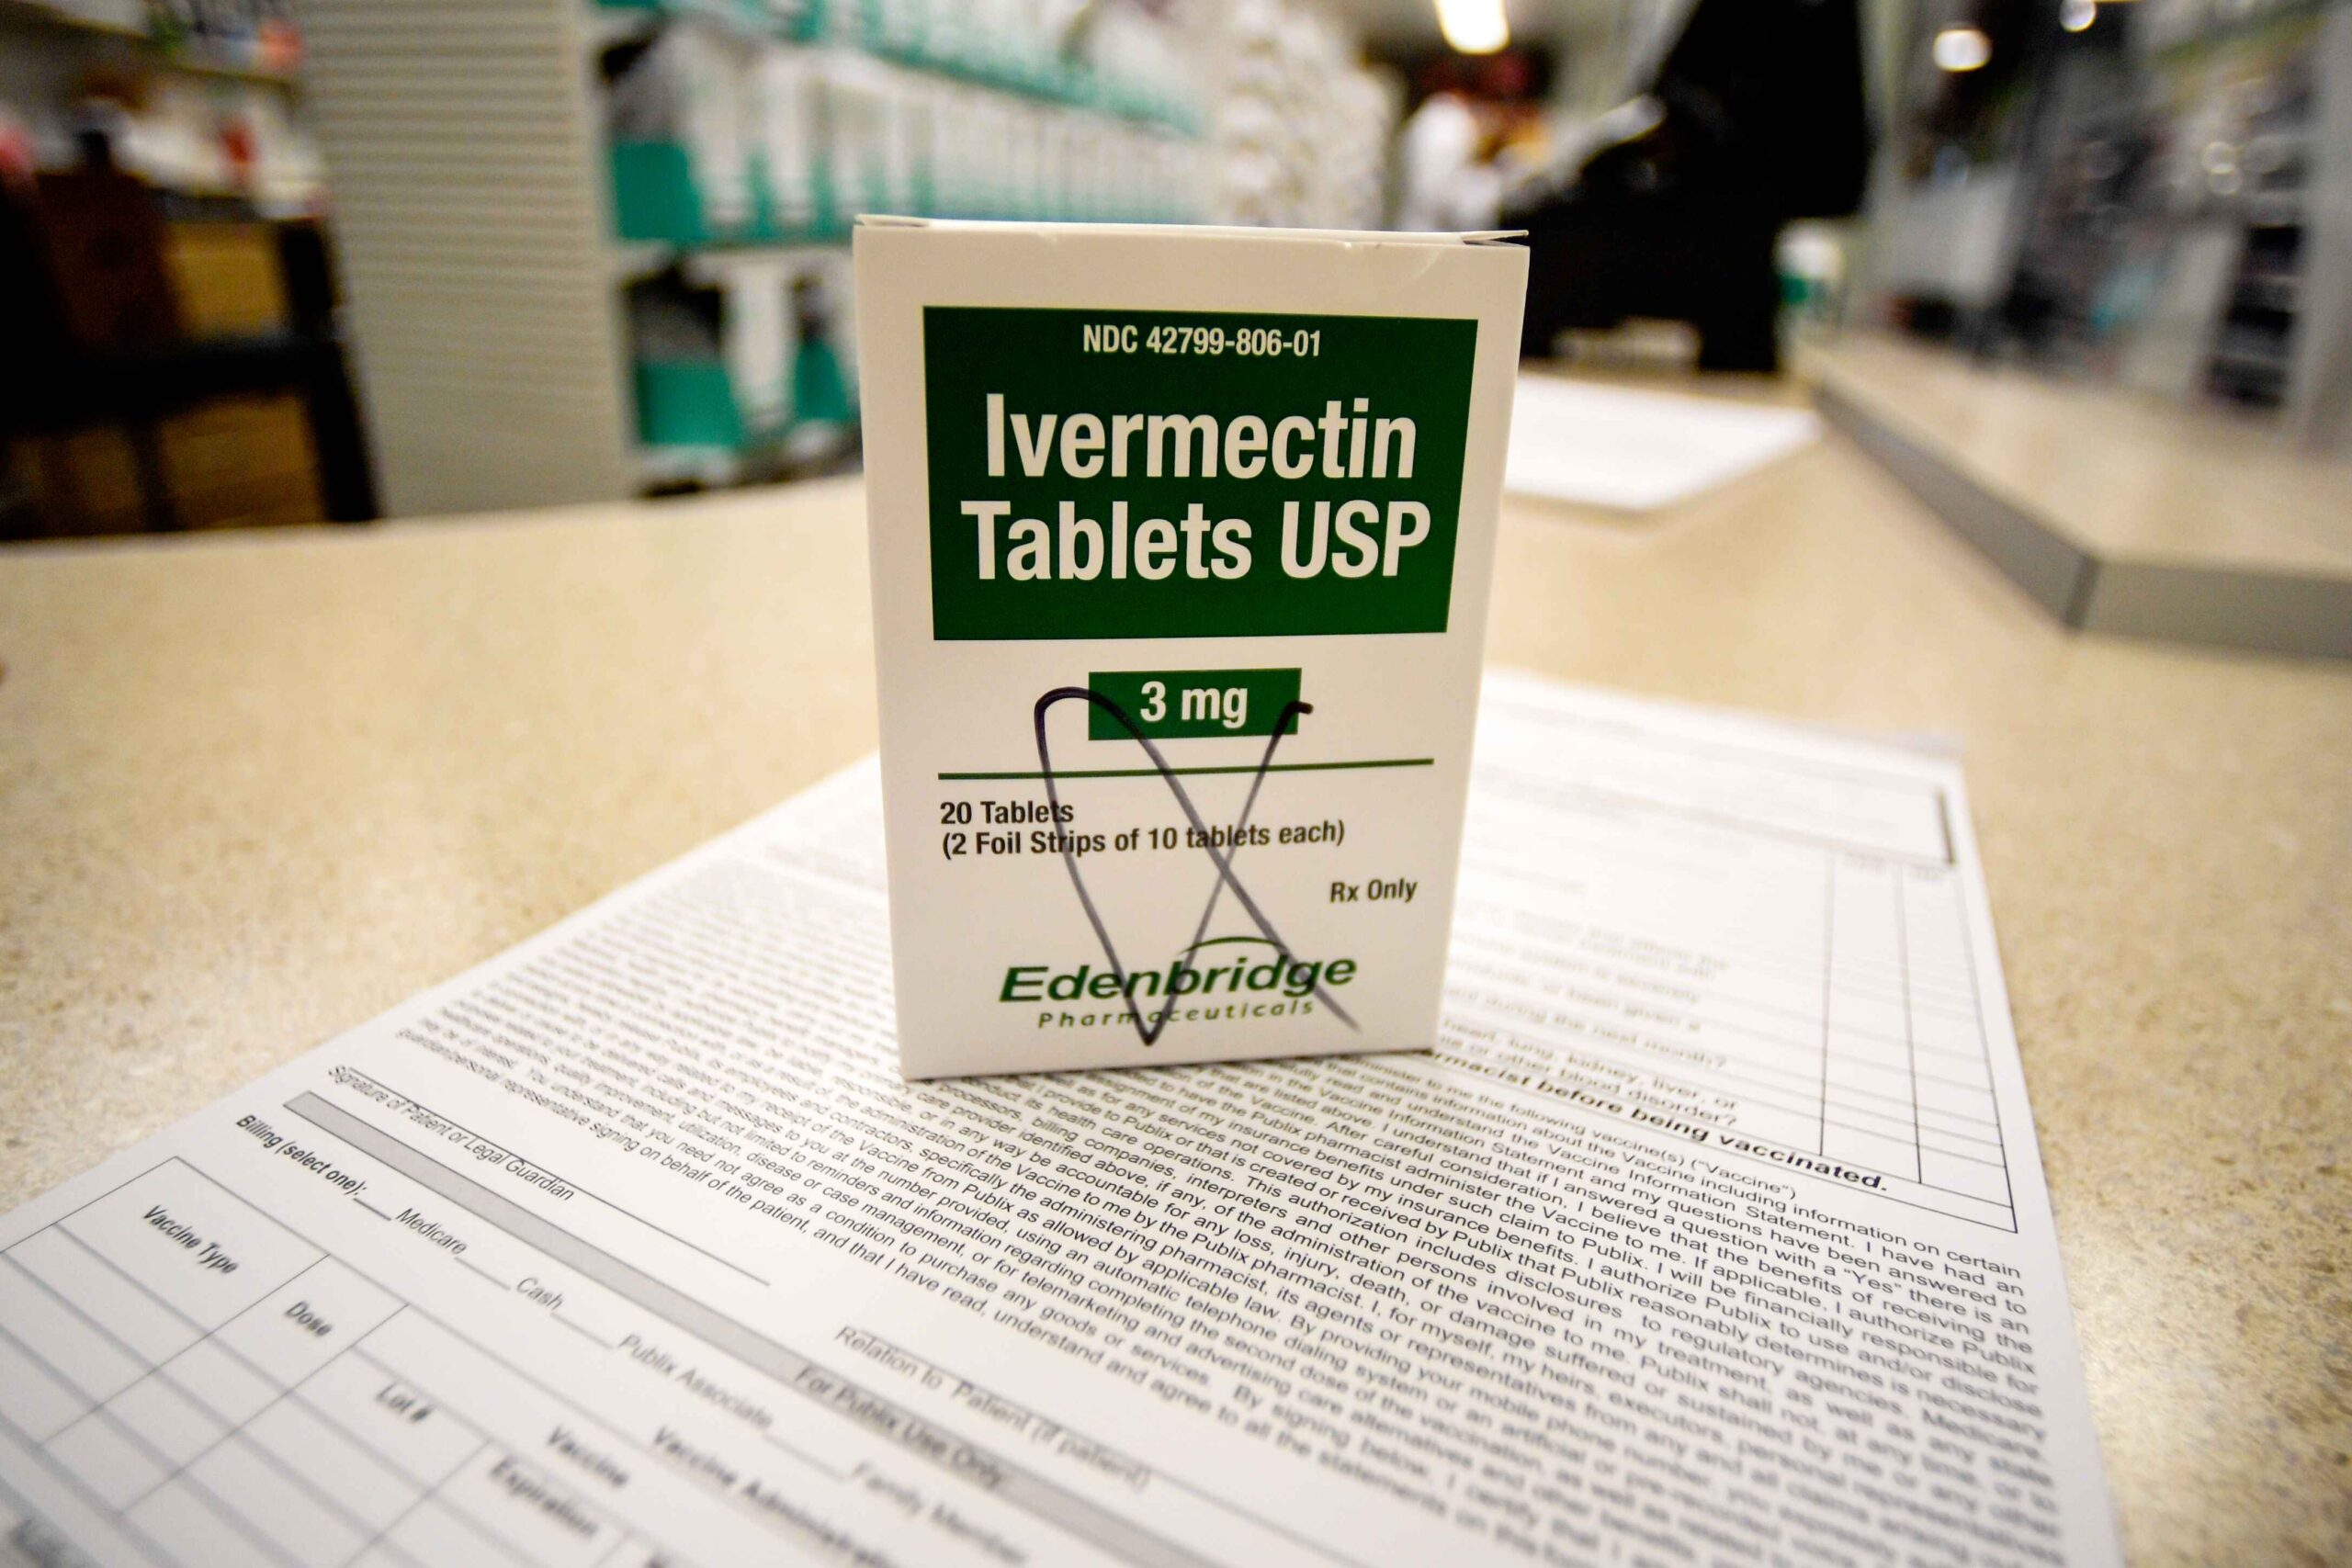 During a court hearing, representatives for the FDA said that doctors can prescribe Ivermectin to treat COVID-19, contradicting pandemic-era statements. | (AP Photo/Mike Stewart)